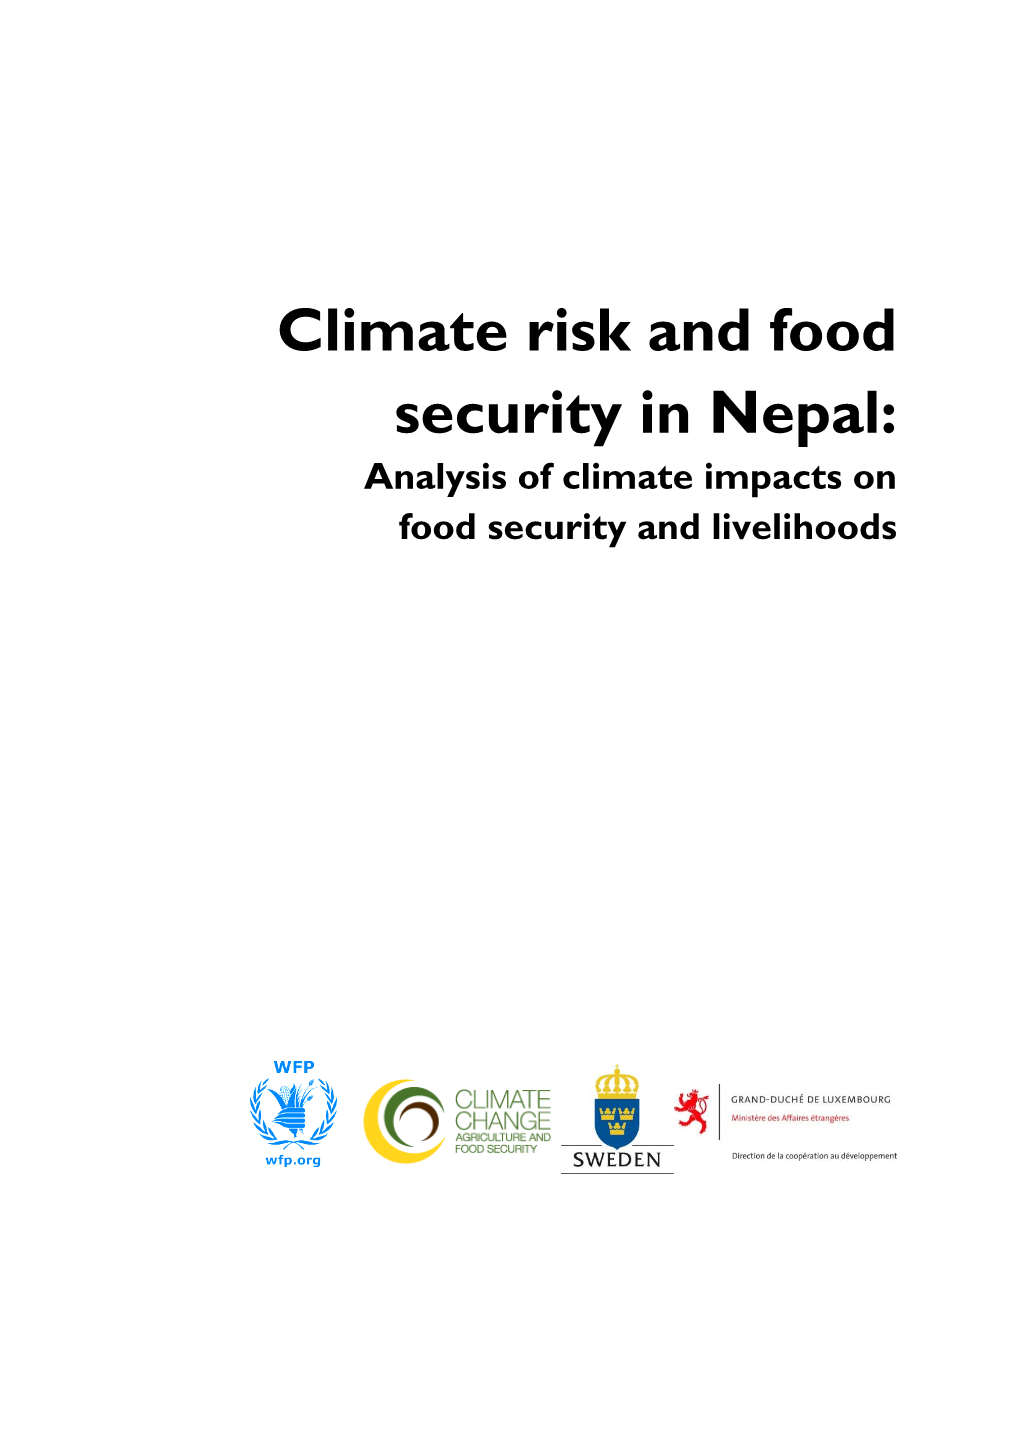 Climate Risk and Food Security in Nepal: Analysis of Climate Impacts on Food Security and Livelihoods